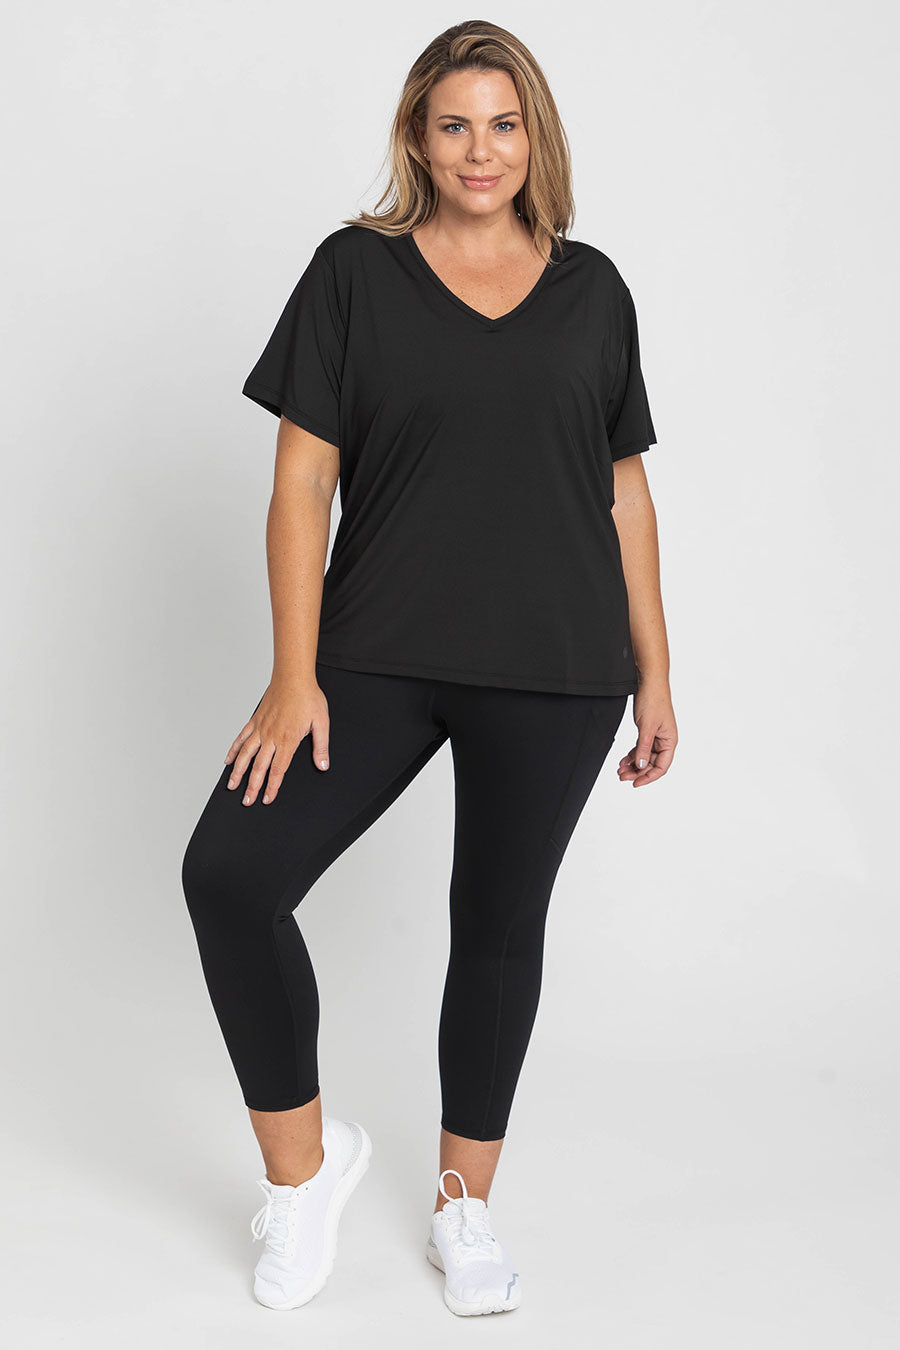 Pace Performance T-Shirt - Black from Active Truth™
